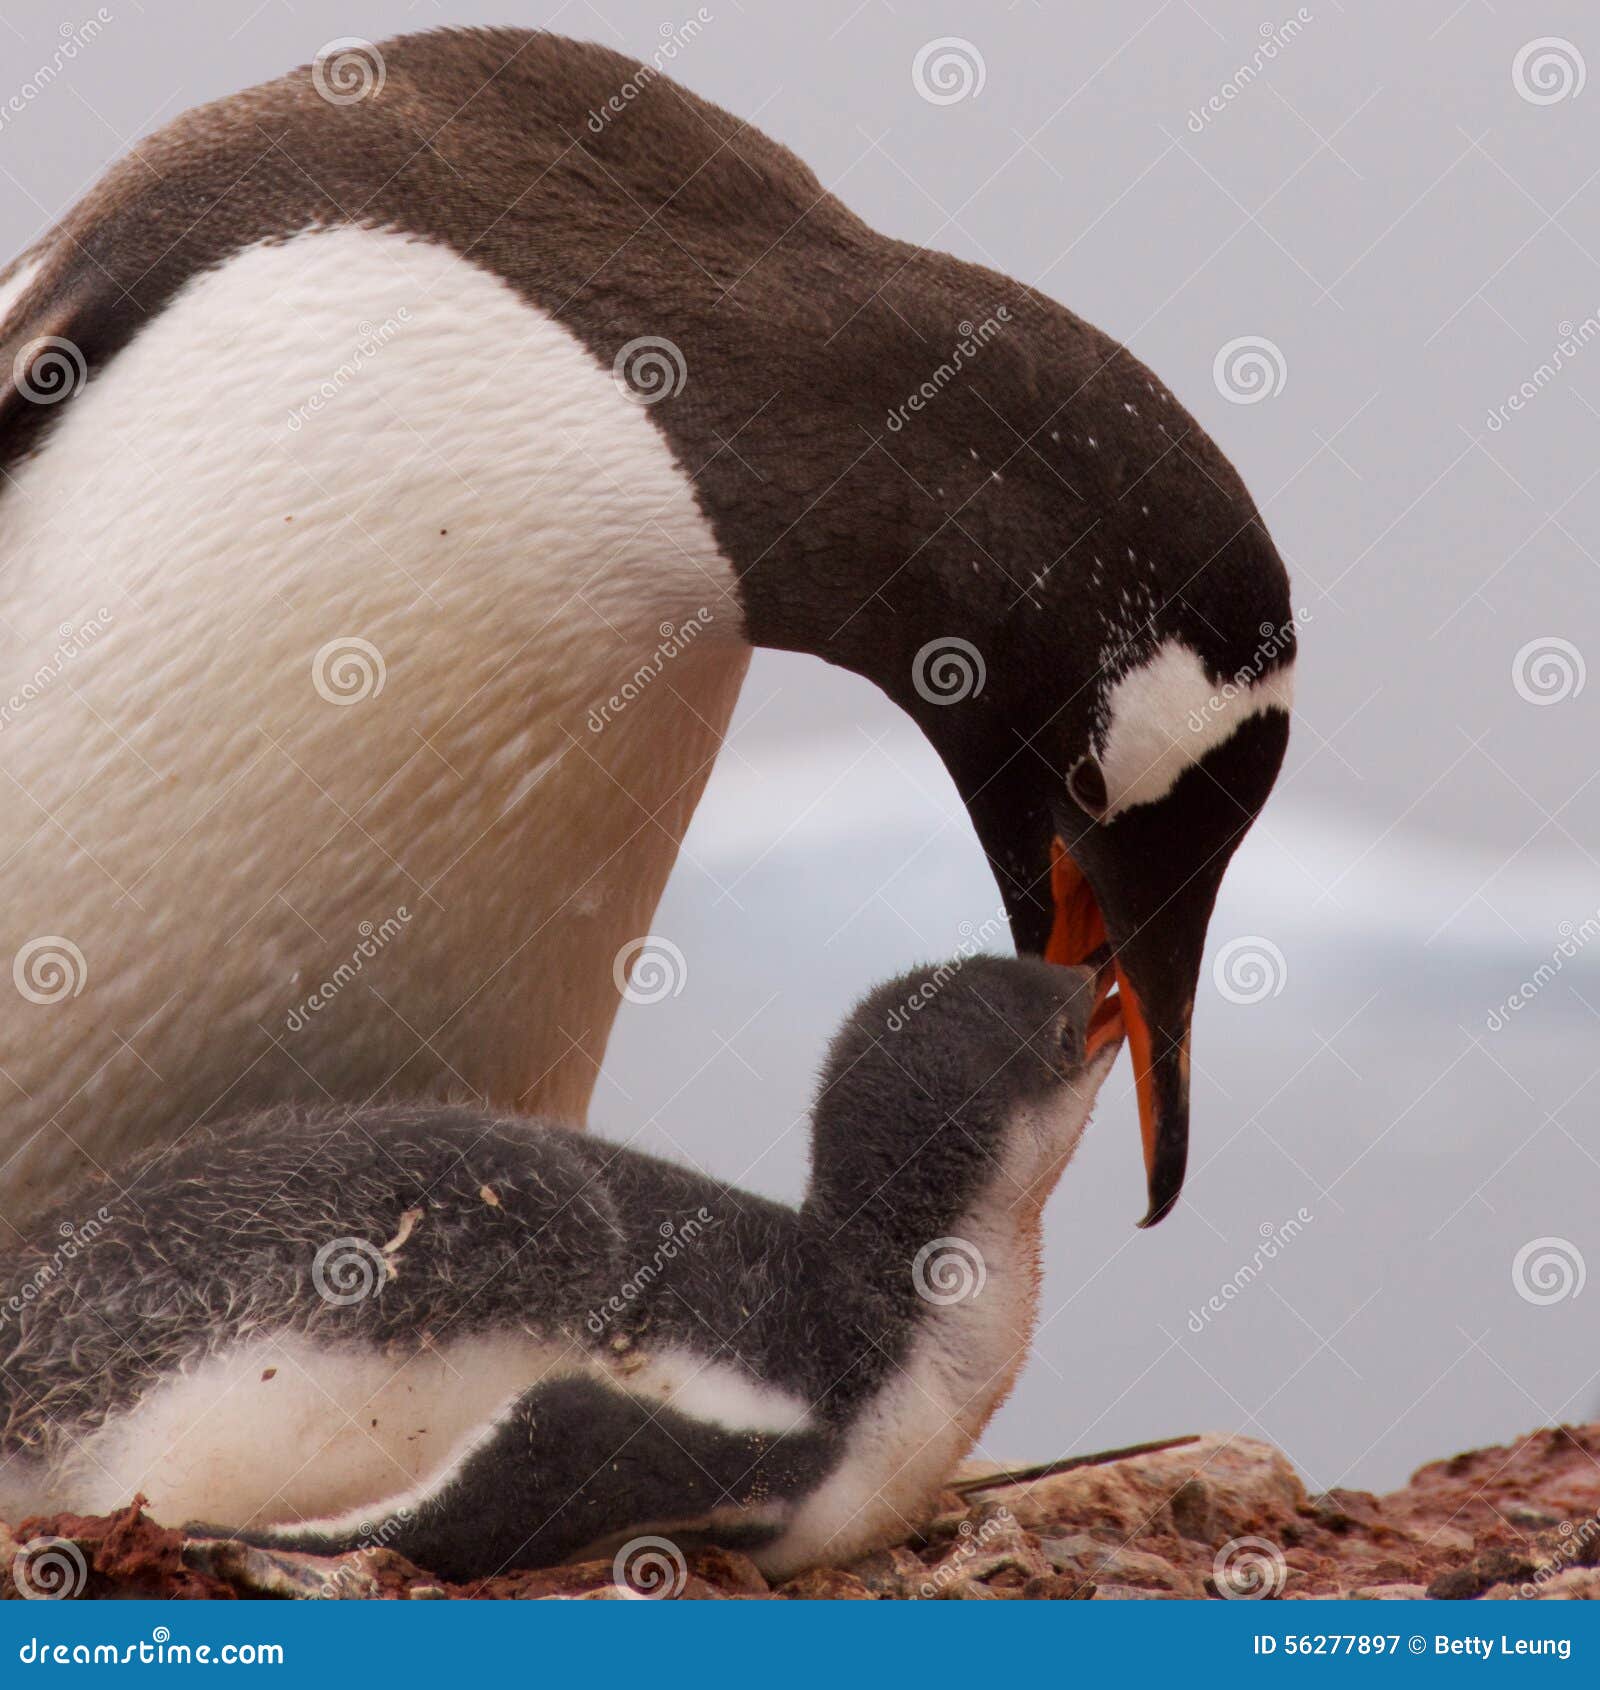 328 Penguin Mouth Photos Free Royalty Free Stock Photos From Dreamstime